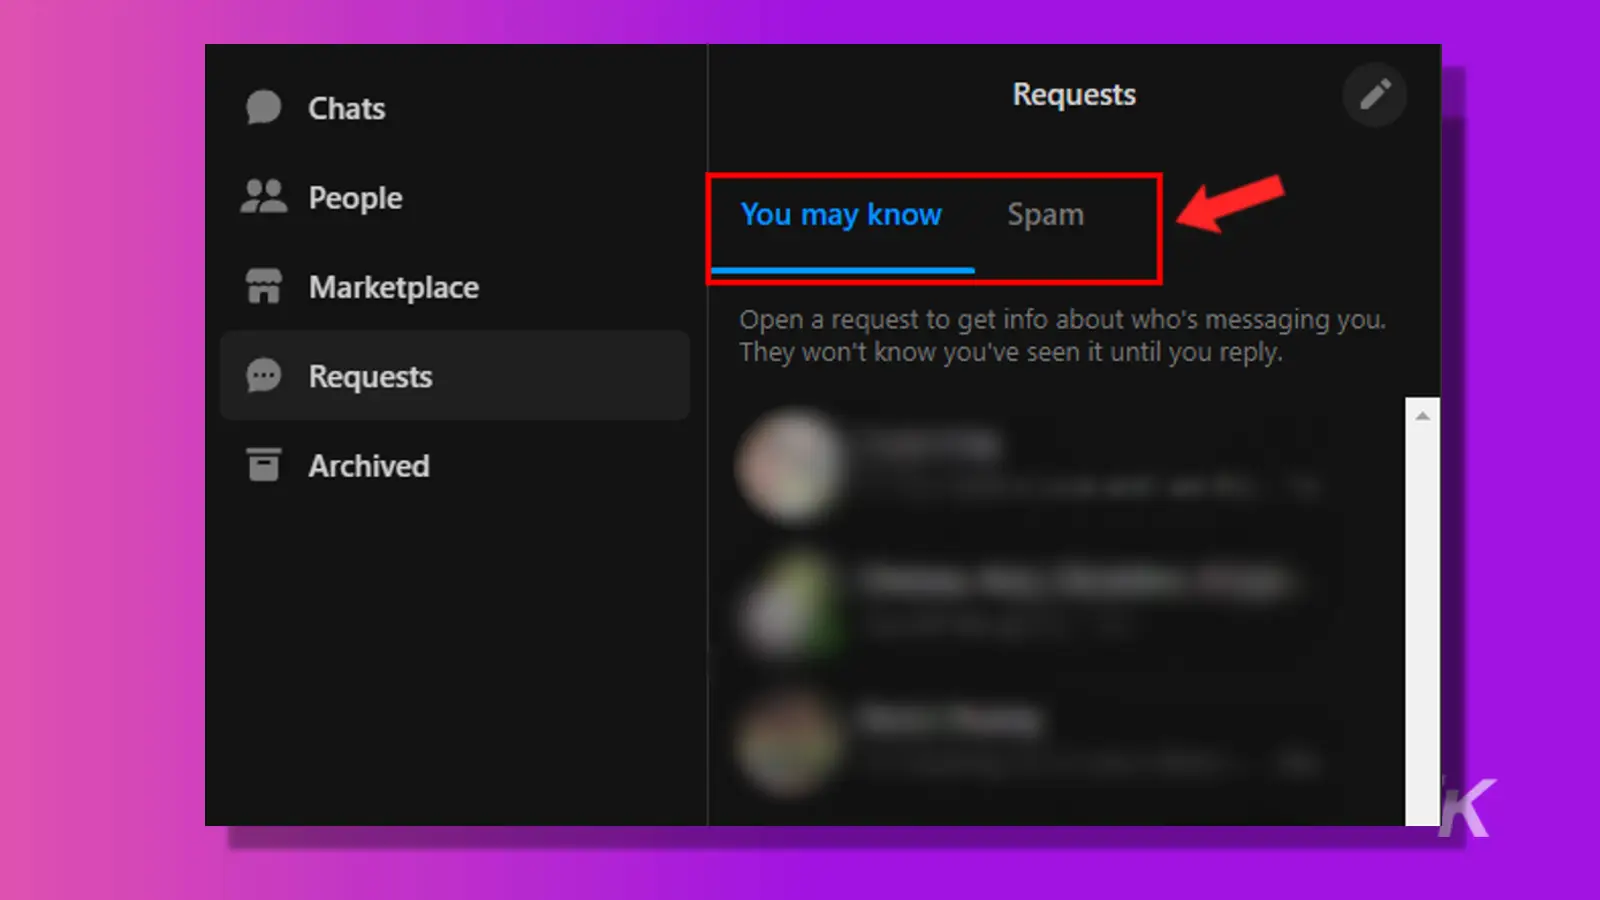 messenger web requests spam and people you may know